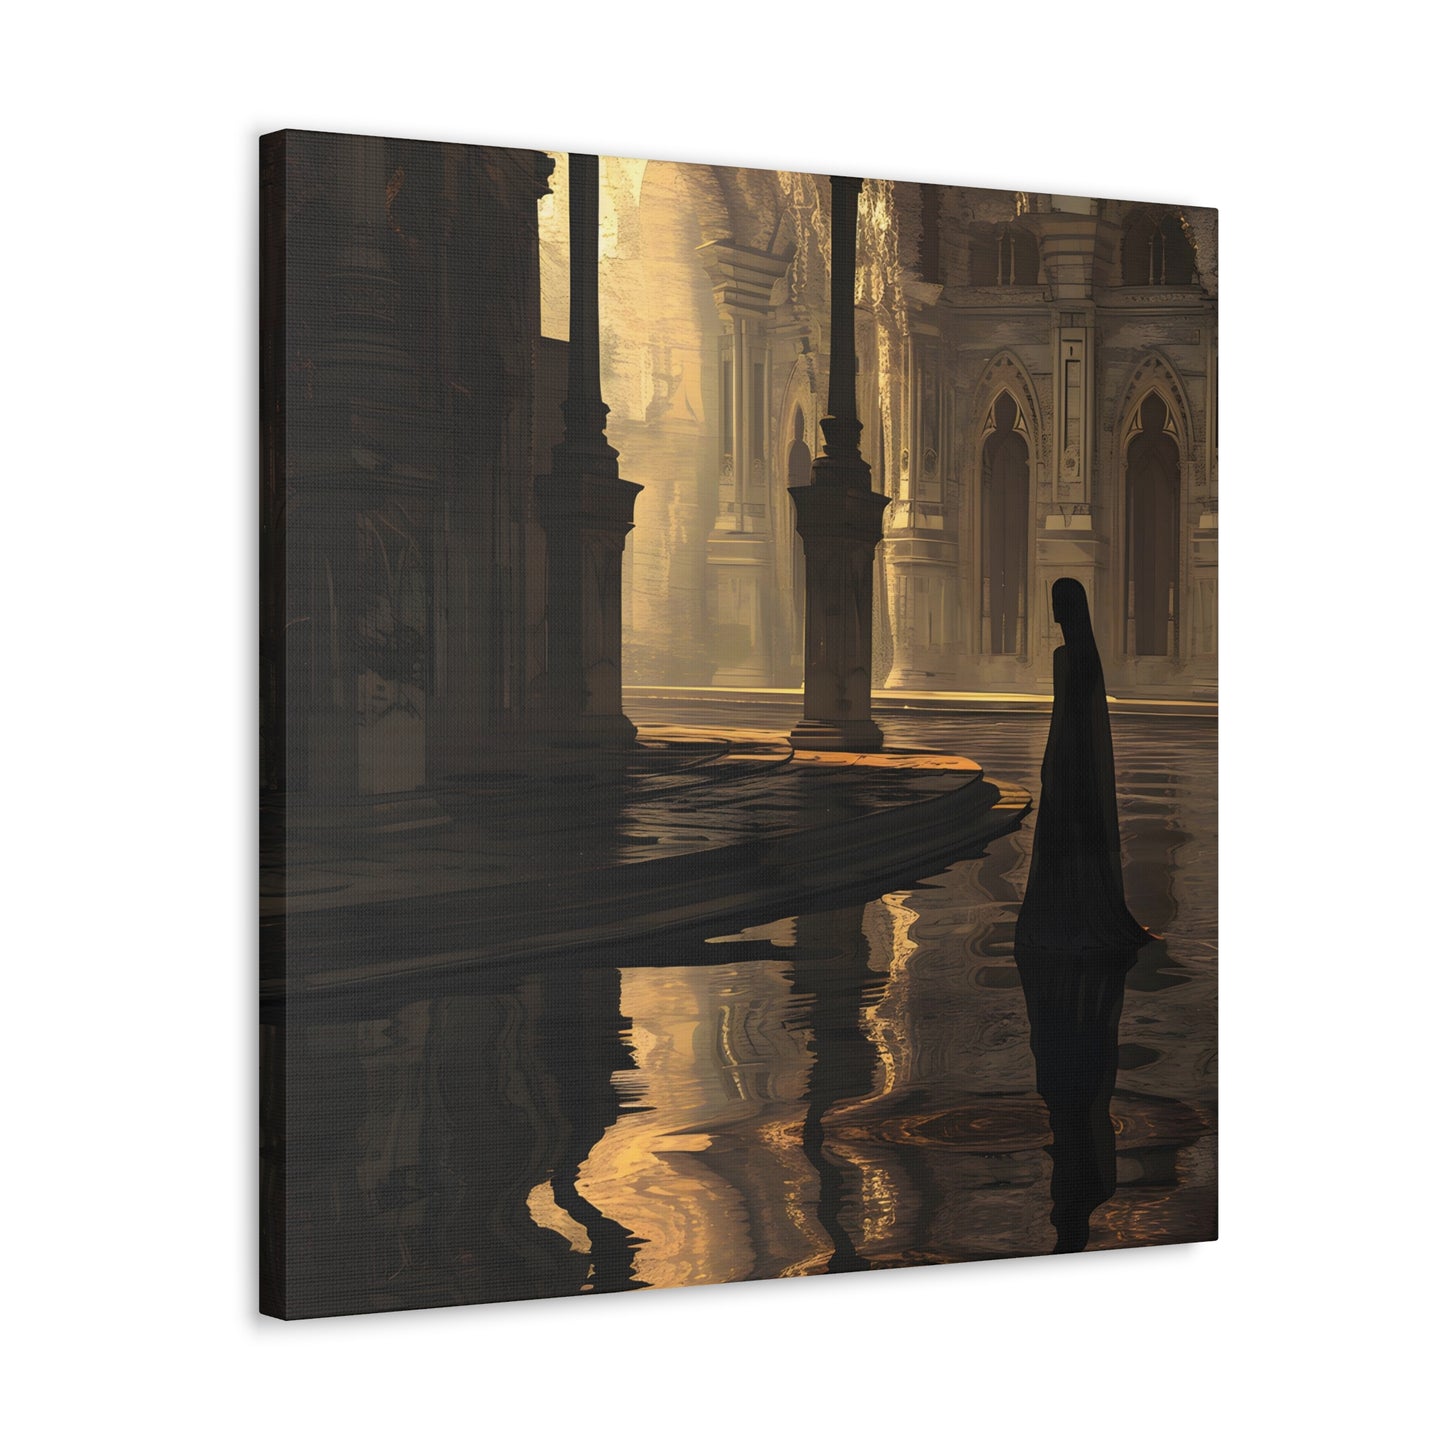 angled Avery Pennington's artwork of a golden-lit, flooded cathedral with a solitary figure in black, blending Gothic architecture with reflections in water, evoking solitude and introspection